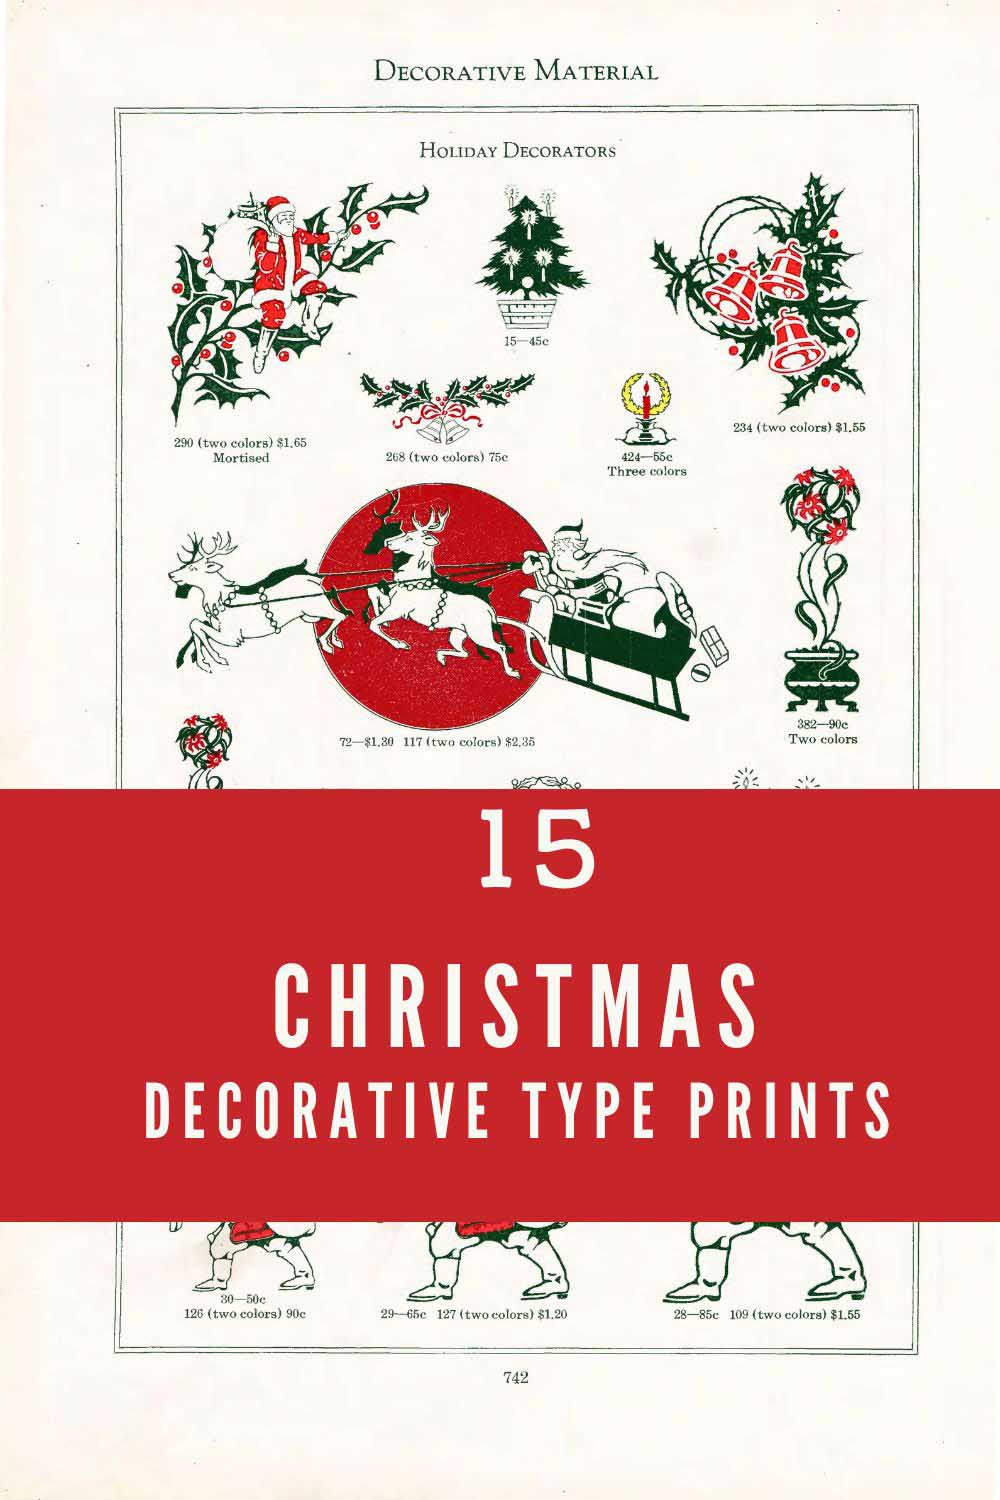 Decorative Holiday images from the American Type Founders Specimen Book